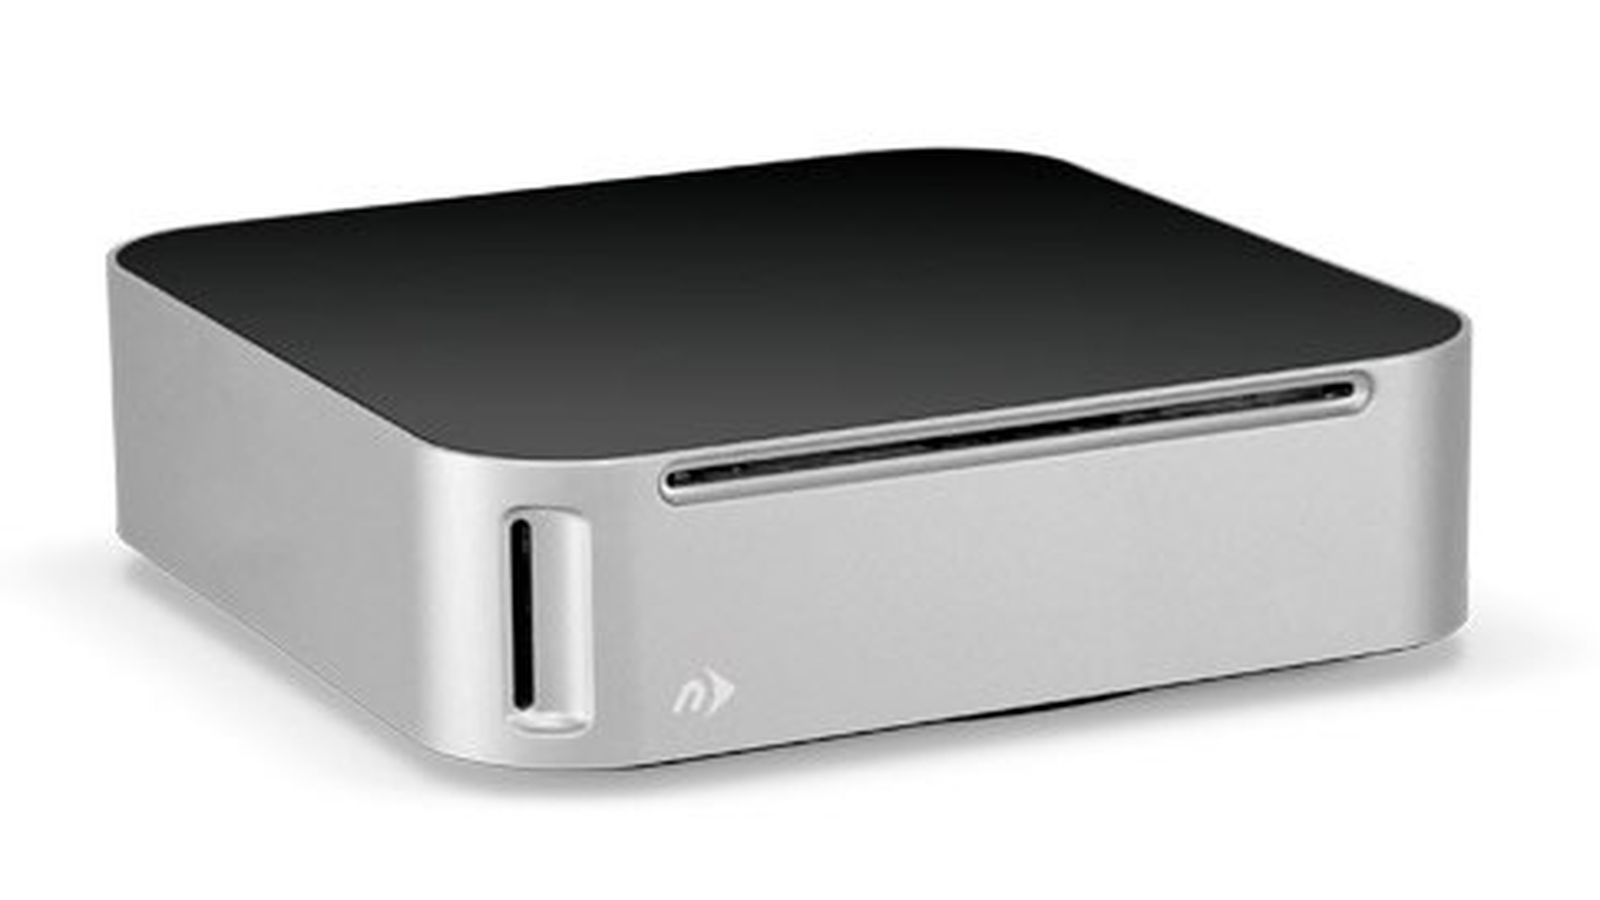 NewerTech Releases miniStack MAX Hard Drive/Blu-Ray Burner